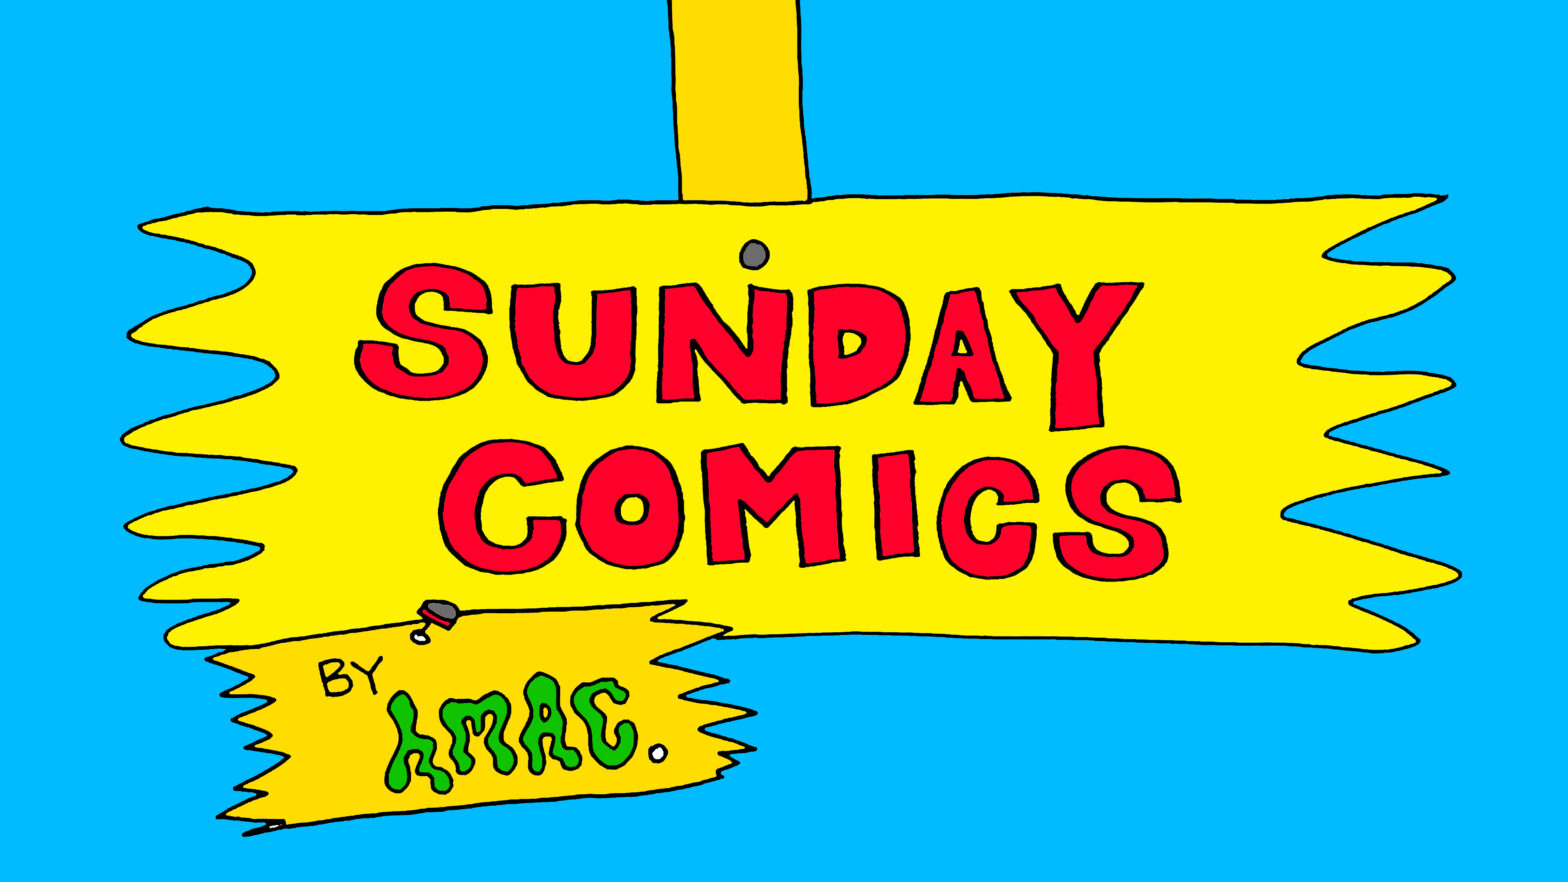 Yellow banner in a a blue background. that reads "Sunday Comics" in red, with a smaller banner underneath that read "by HMAC""